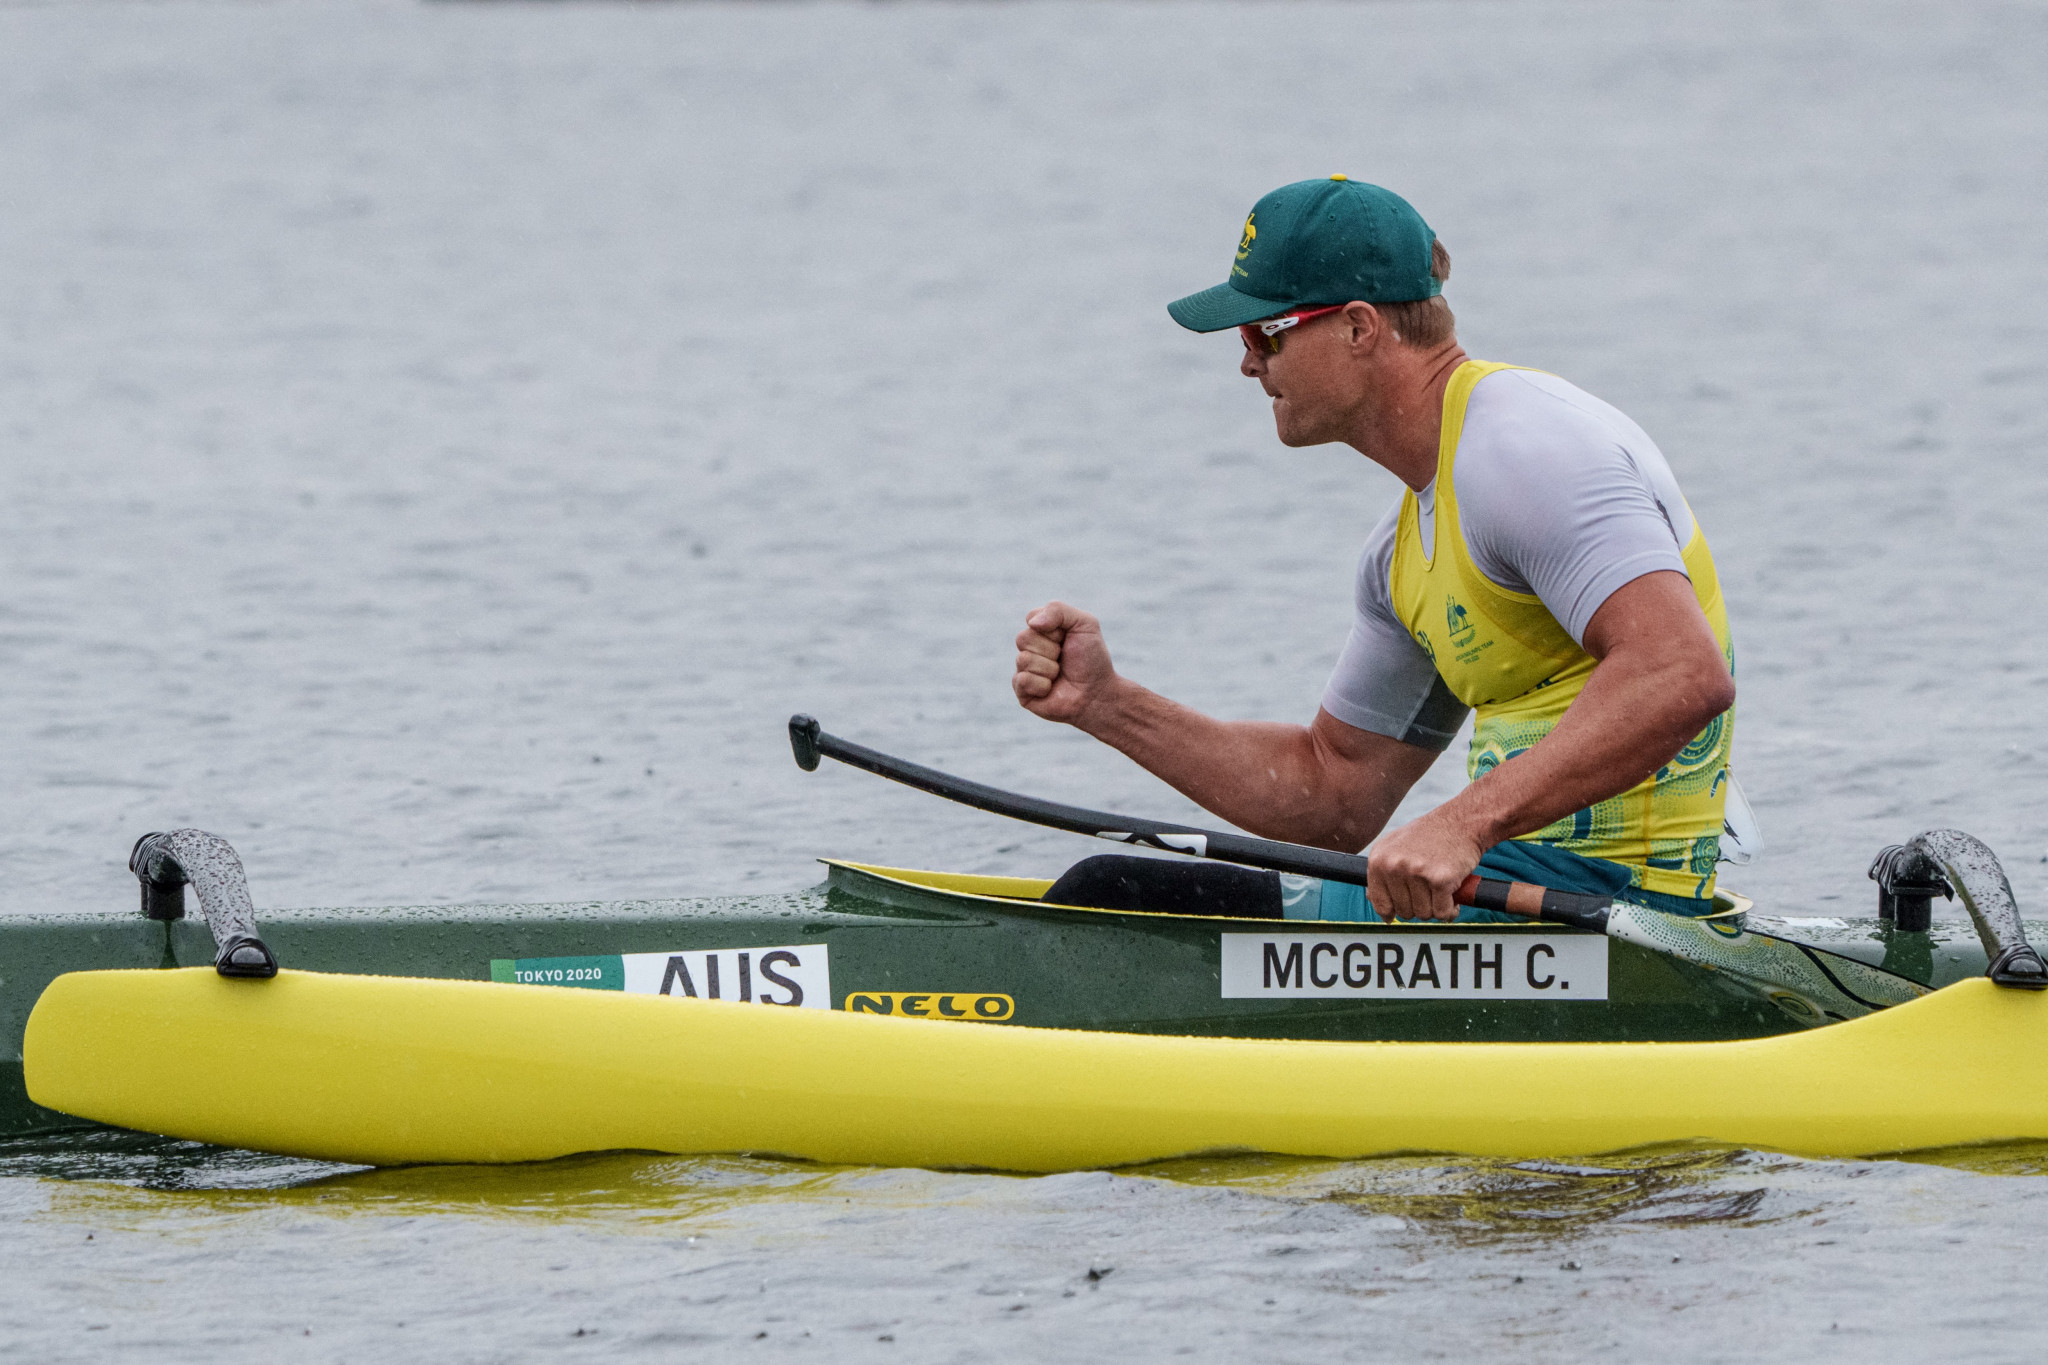 Yemelianov and McGrath successfully defend canoeing golds at Tokyo 2020 Paralympics